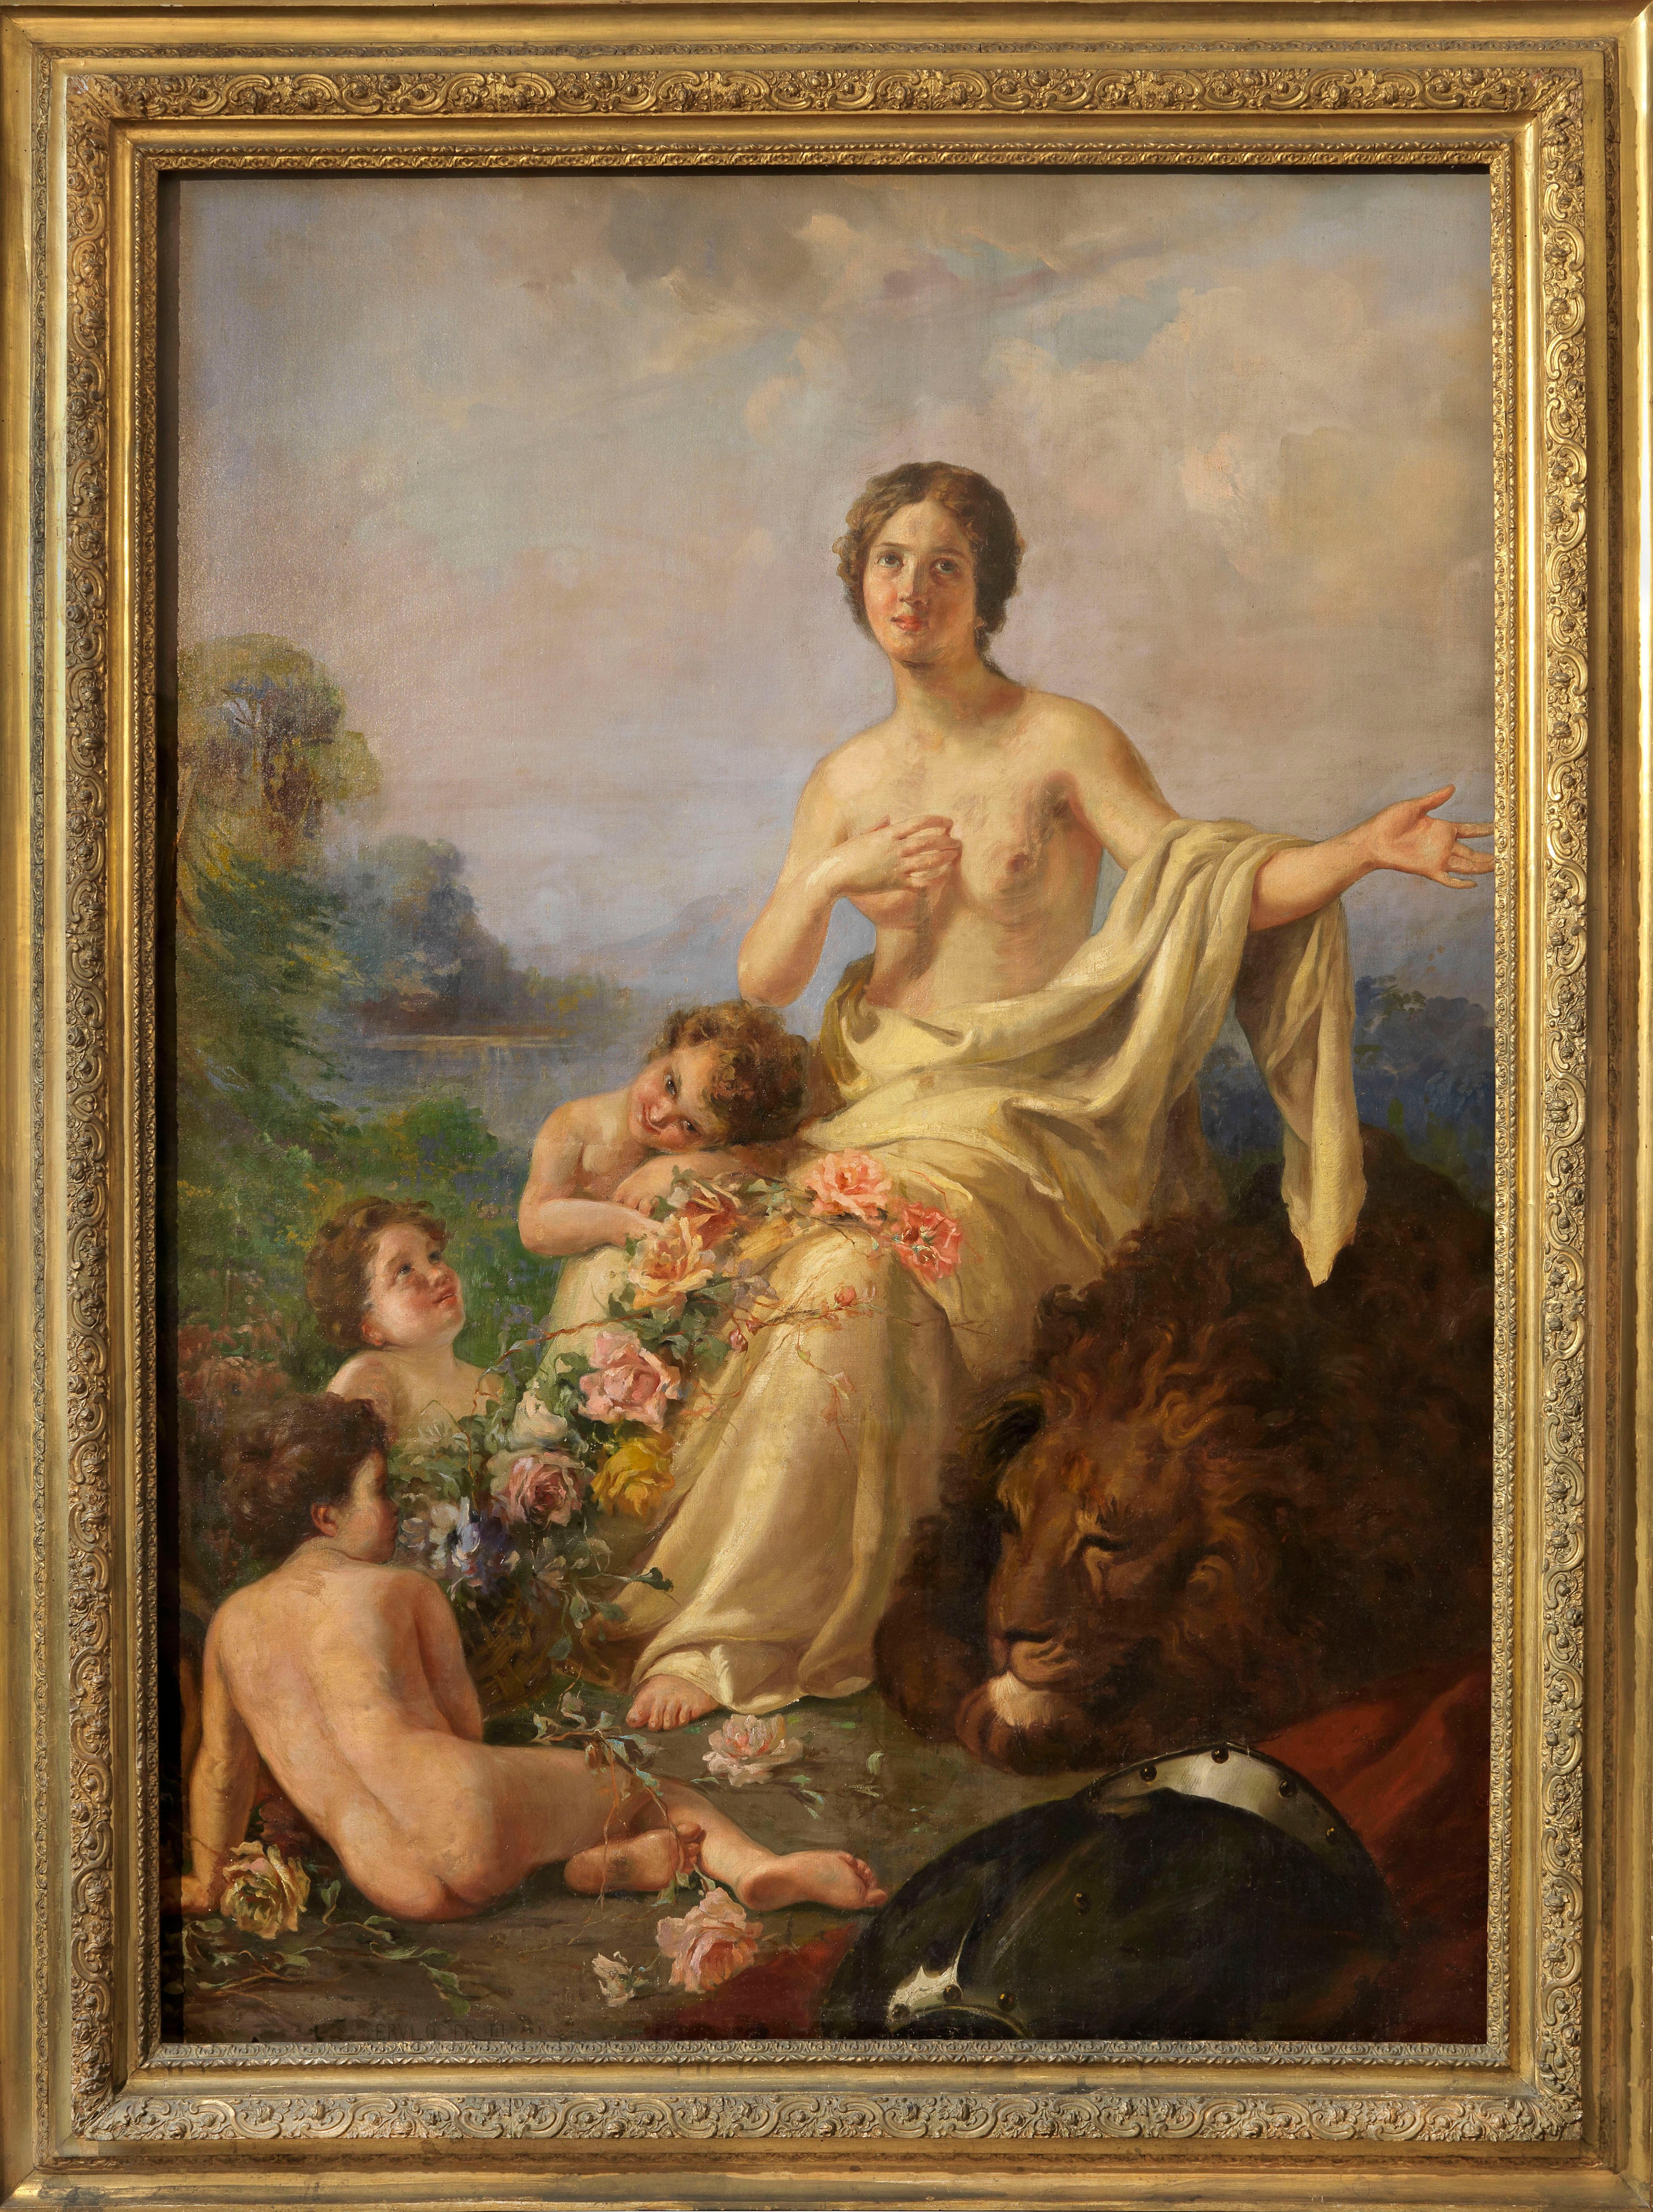 Art Nouveau Allegory of Peace Painting Oil on Canvas Signed by Erulo Eroli